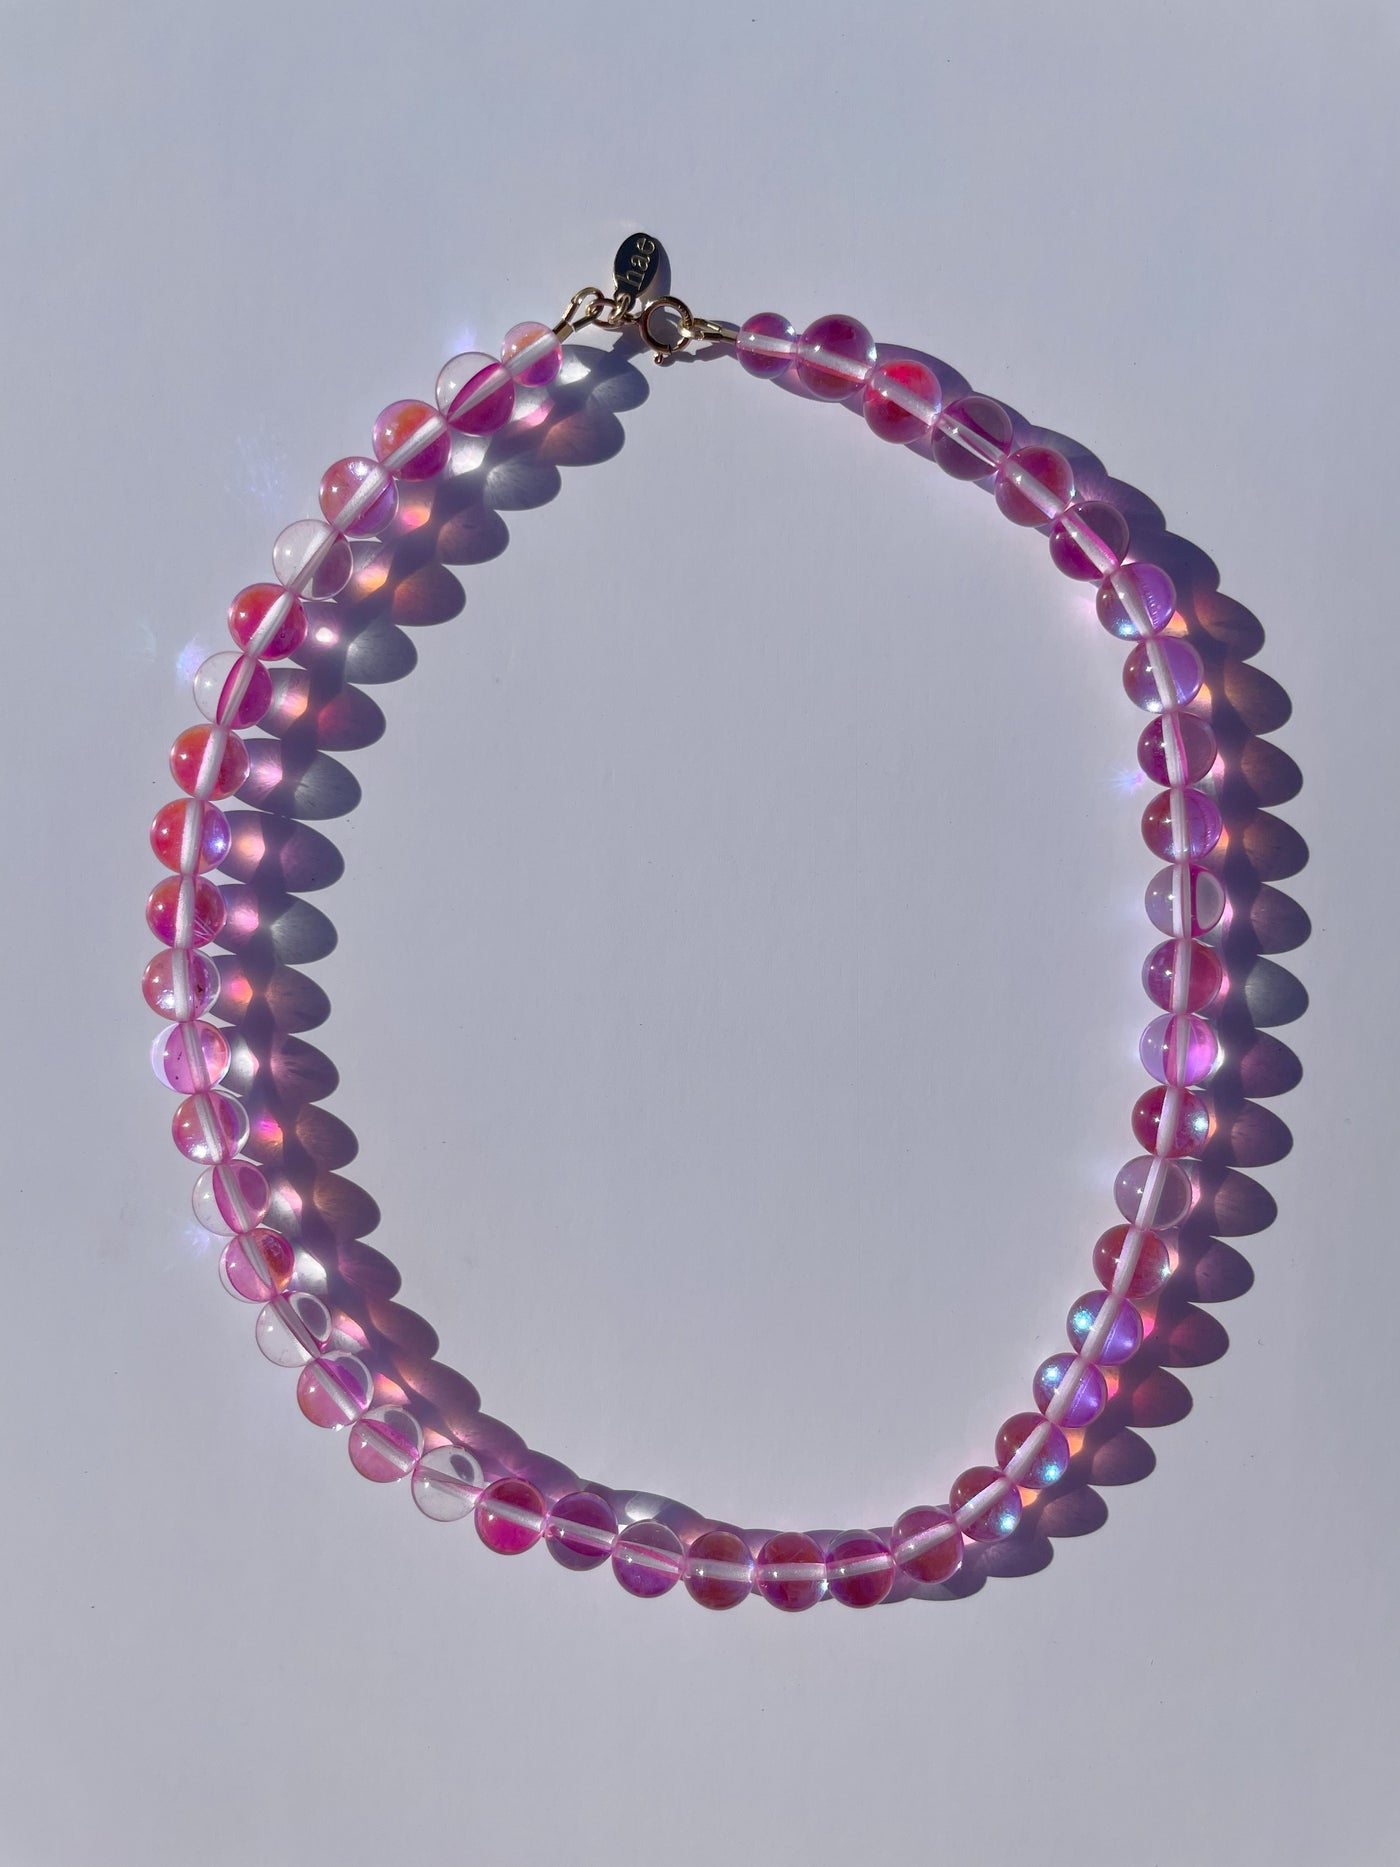 Colorful glass beads with 14k gold filled details. Length 40 cm Bubble Diameter: 8mm | Bubble Necklace | Handmade Jewelry in Germany | HolaAmorEstudios